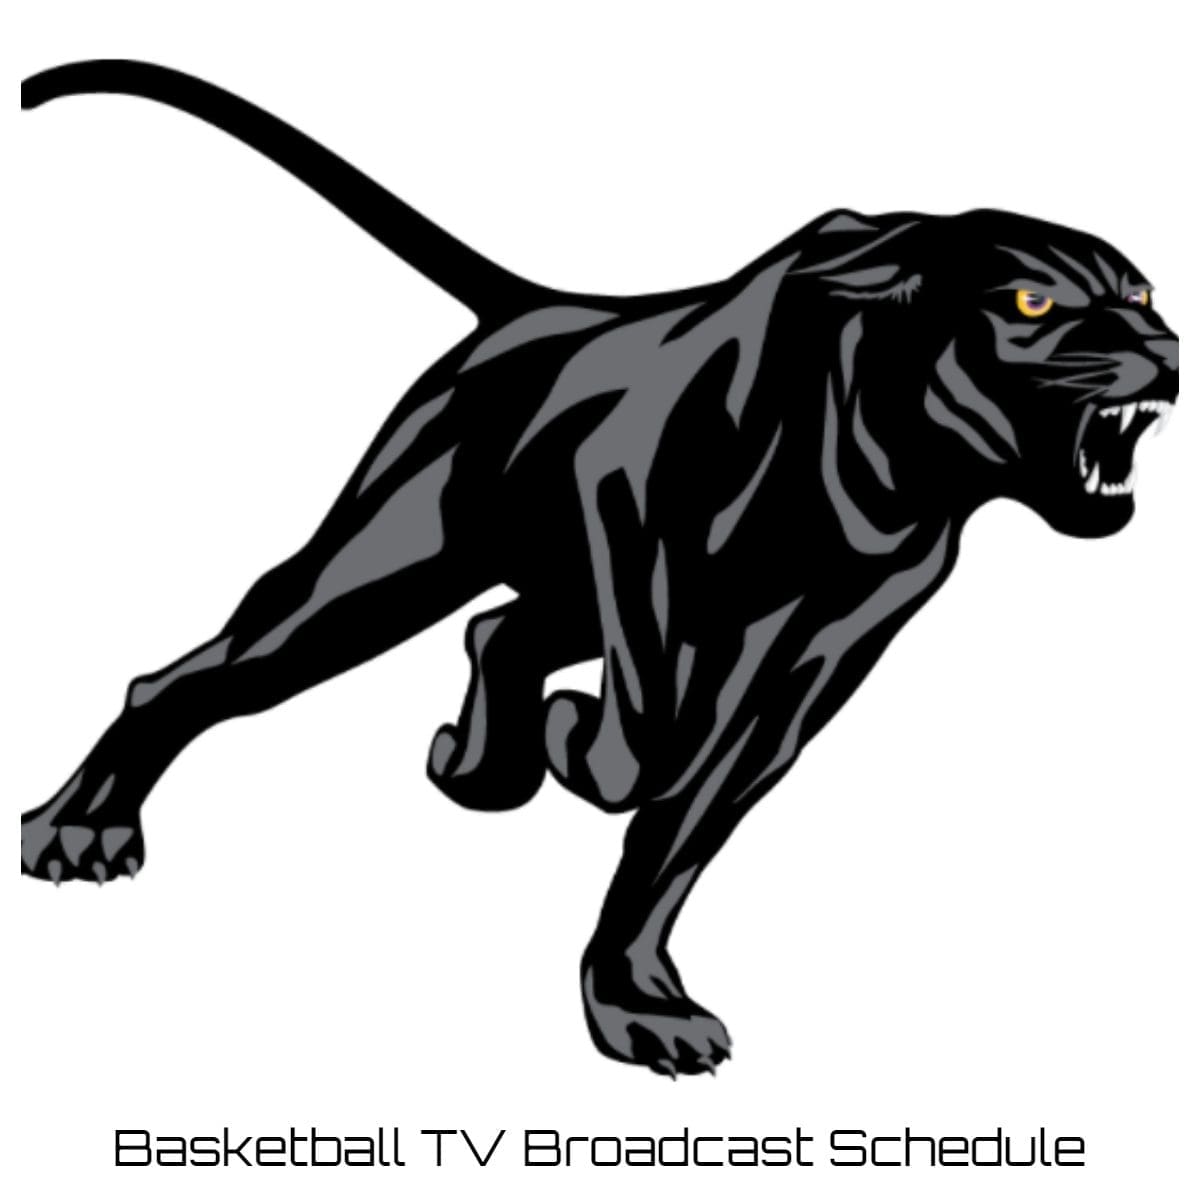 Prairie View A&M Panthers Basketball TV Broadcast Schedule